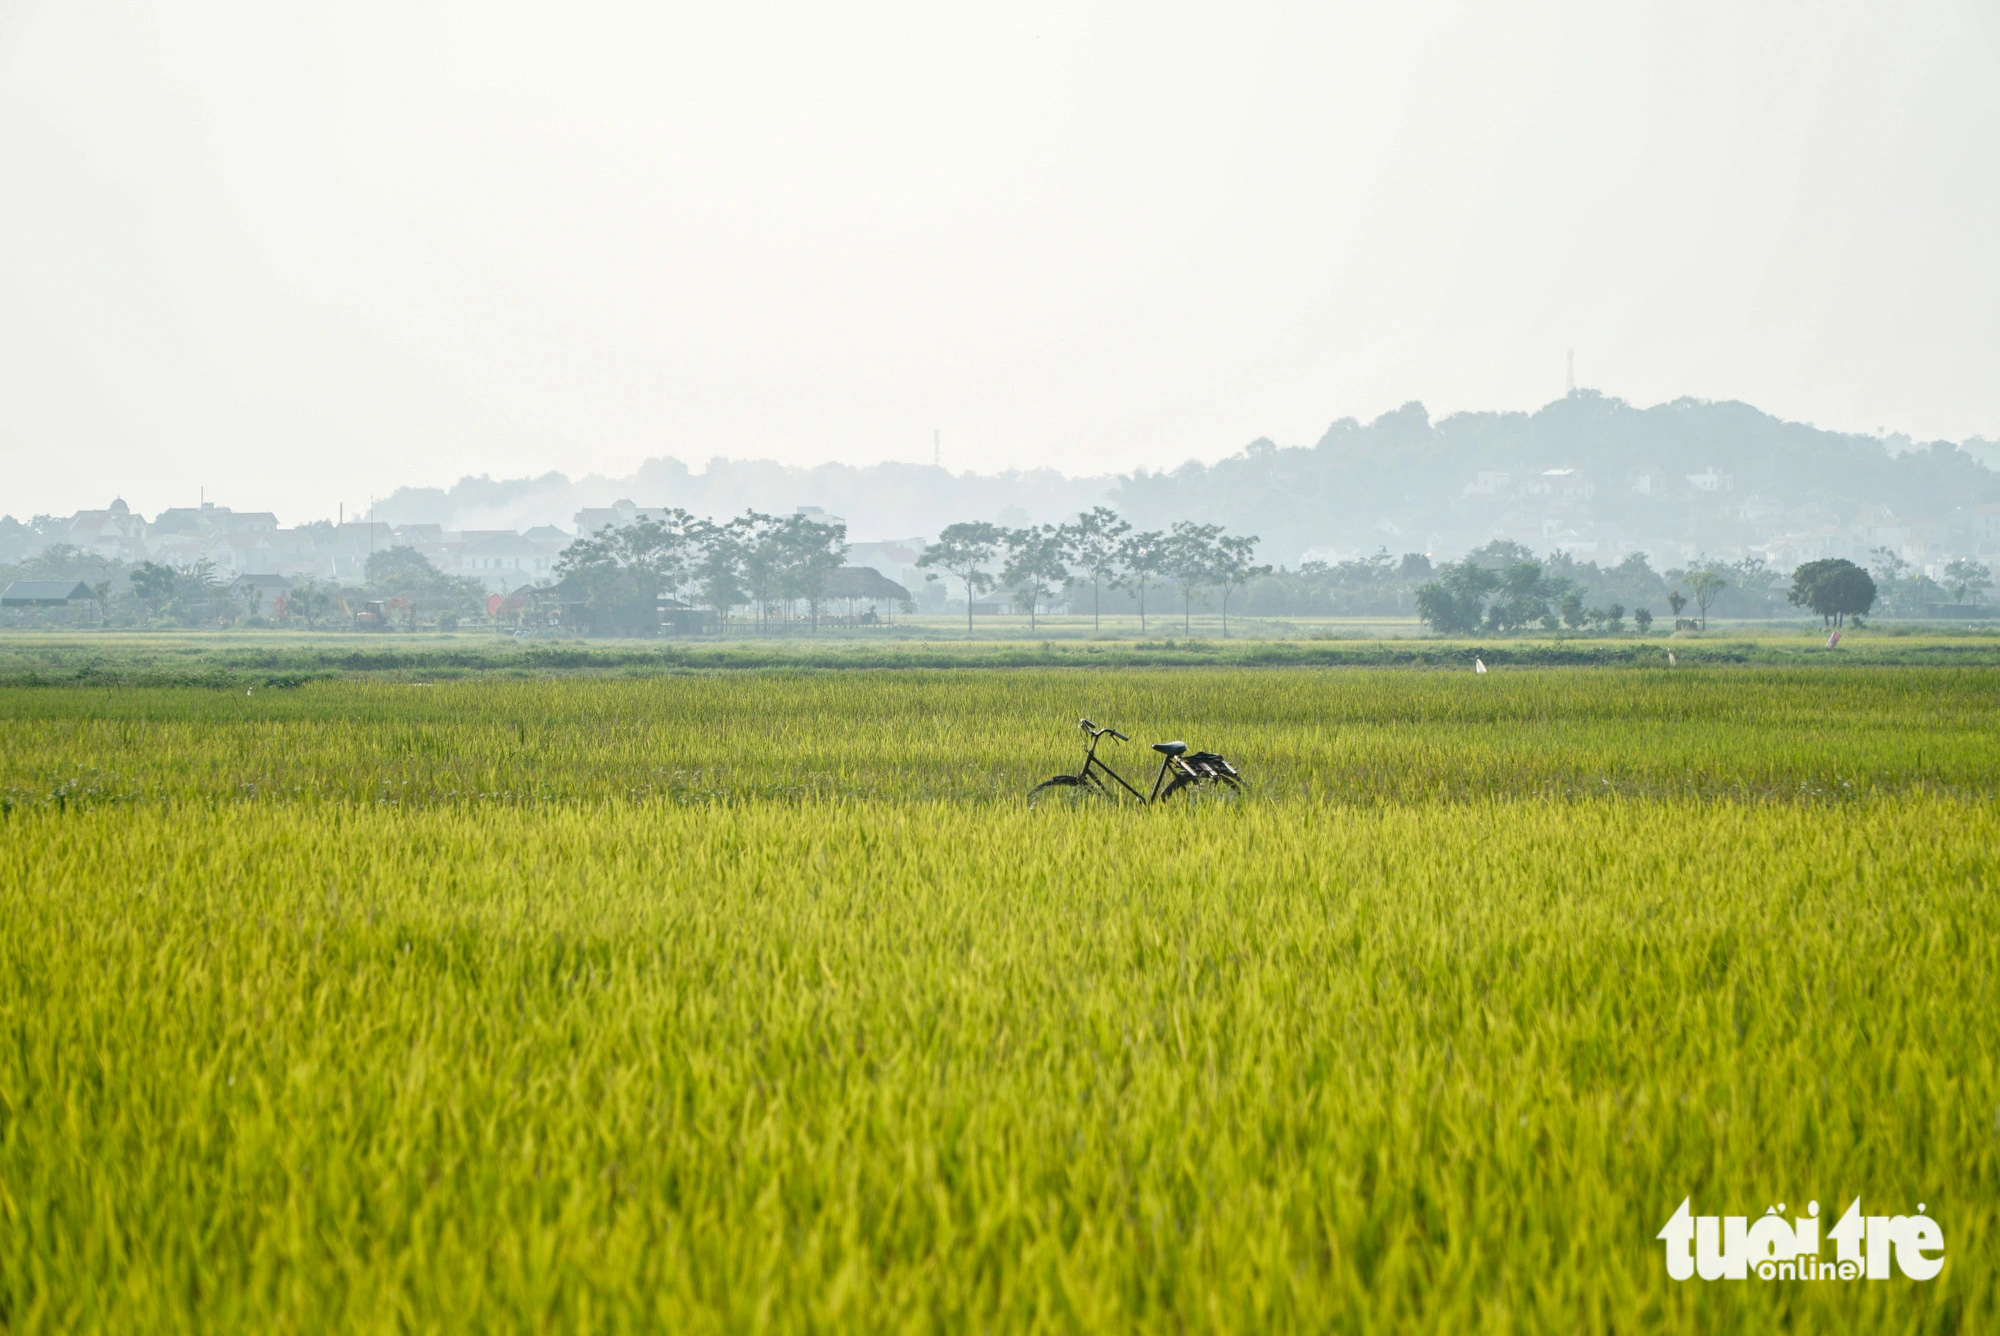 A bike parked amid the rice fields in Phung Chau Commune, Chuong My District, Hanoi. Photo: Nguyen Hien / Tuoi Tre